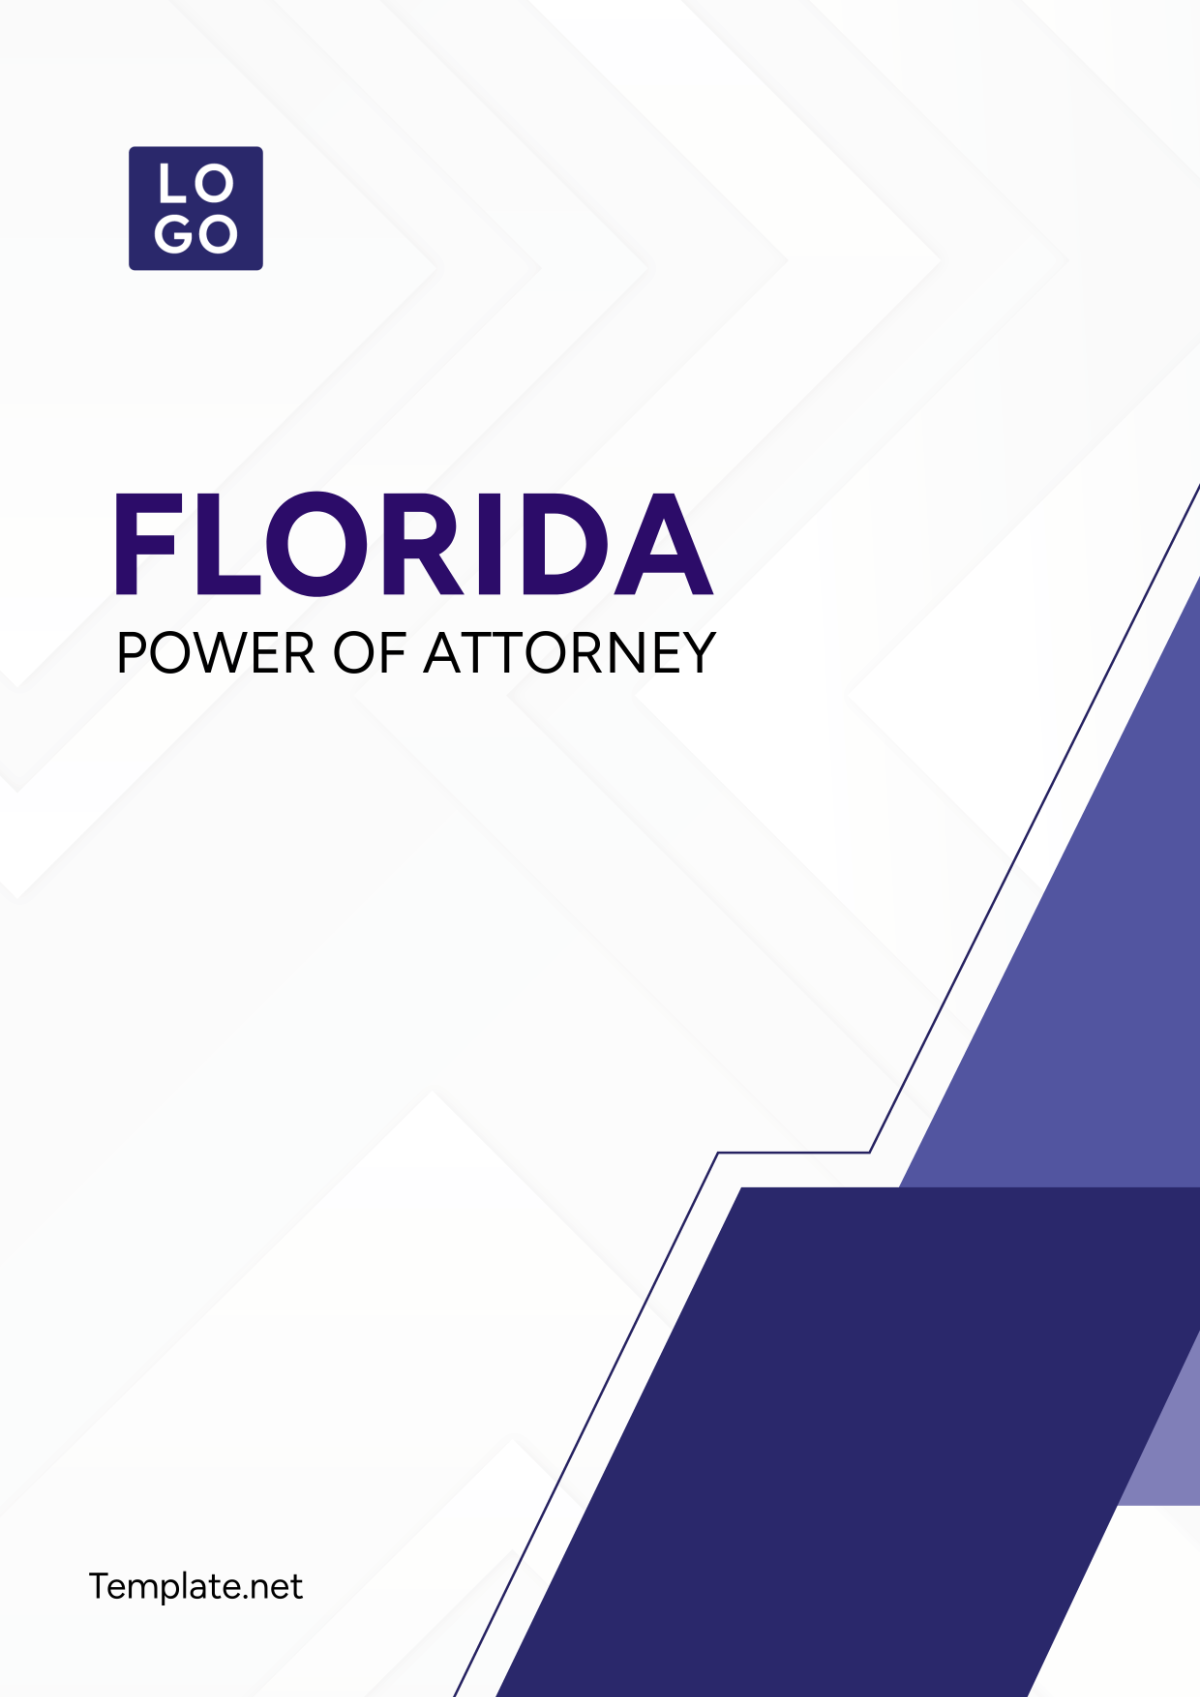 Florida Power of Attorney Template